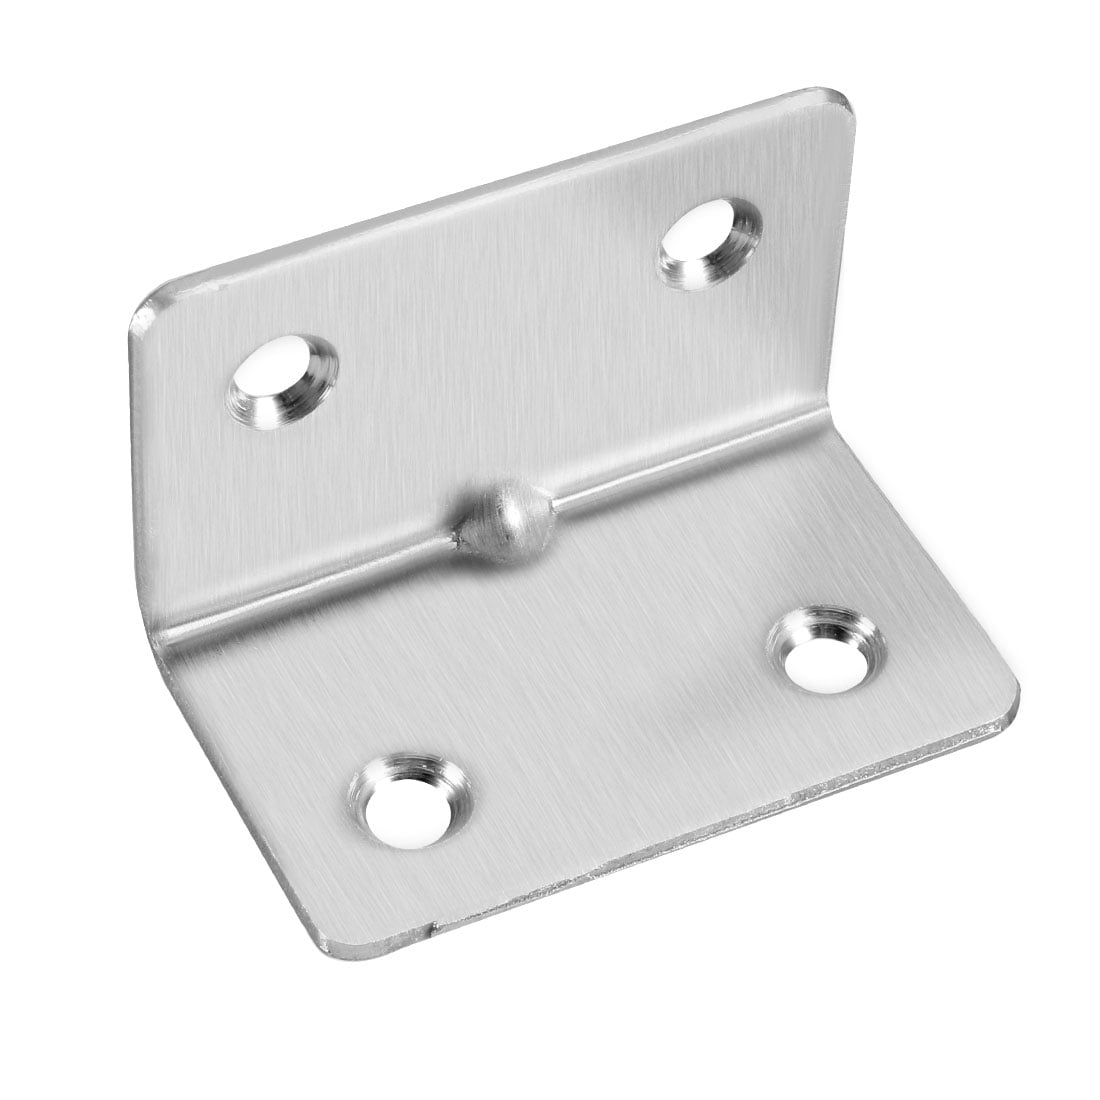 31mm x 31mm x 3mm A2 STAINLESS CORNER ANGLE BRACE BRACKETS DECKING AD2 